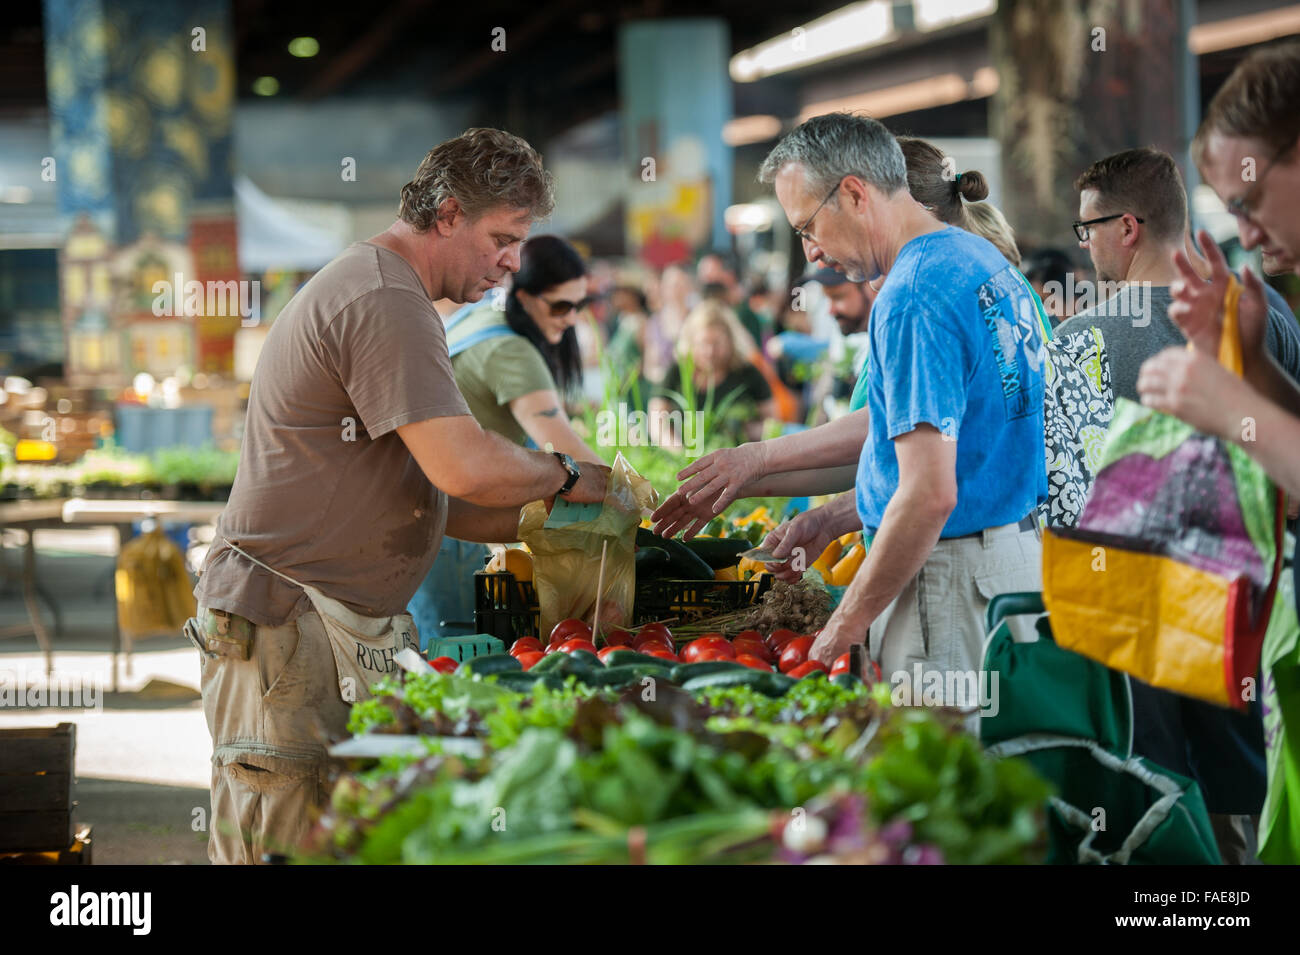 People buying produce at a local farmers market Stock Photo